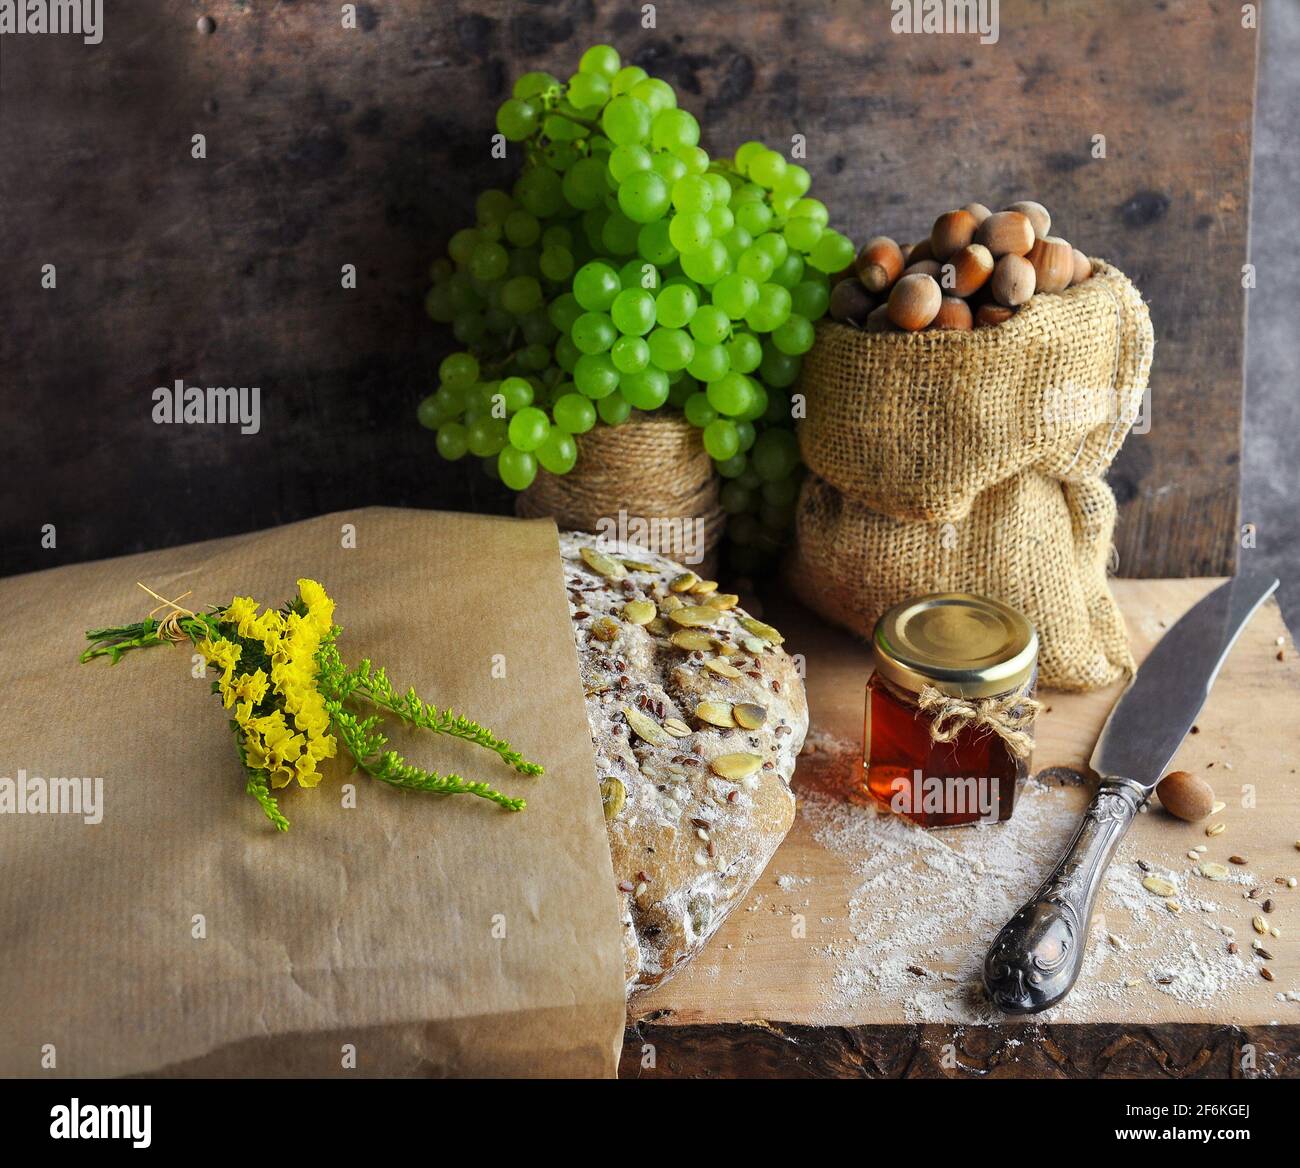 Rustic style bread with a bunch of grapes, nuts in a bag, honey, a knife. Stock Photo